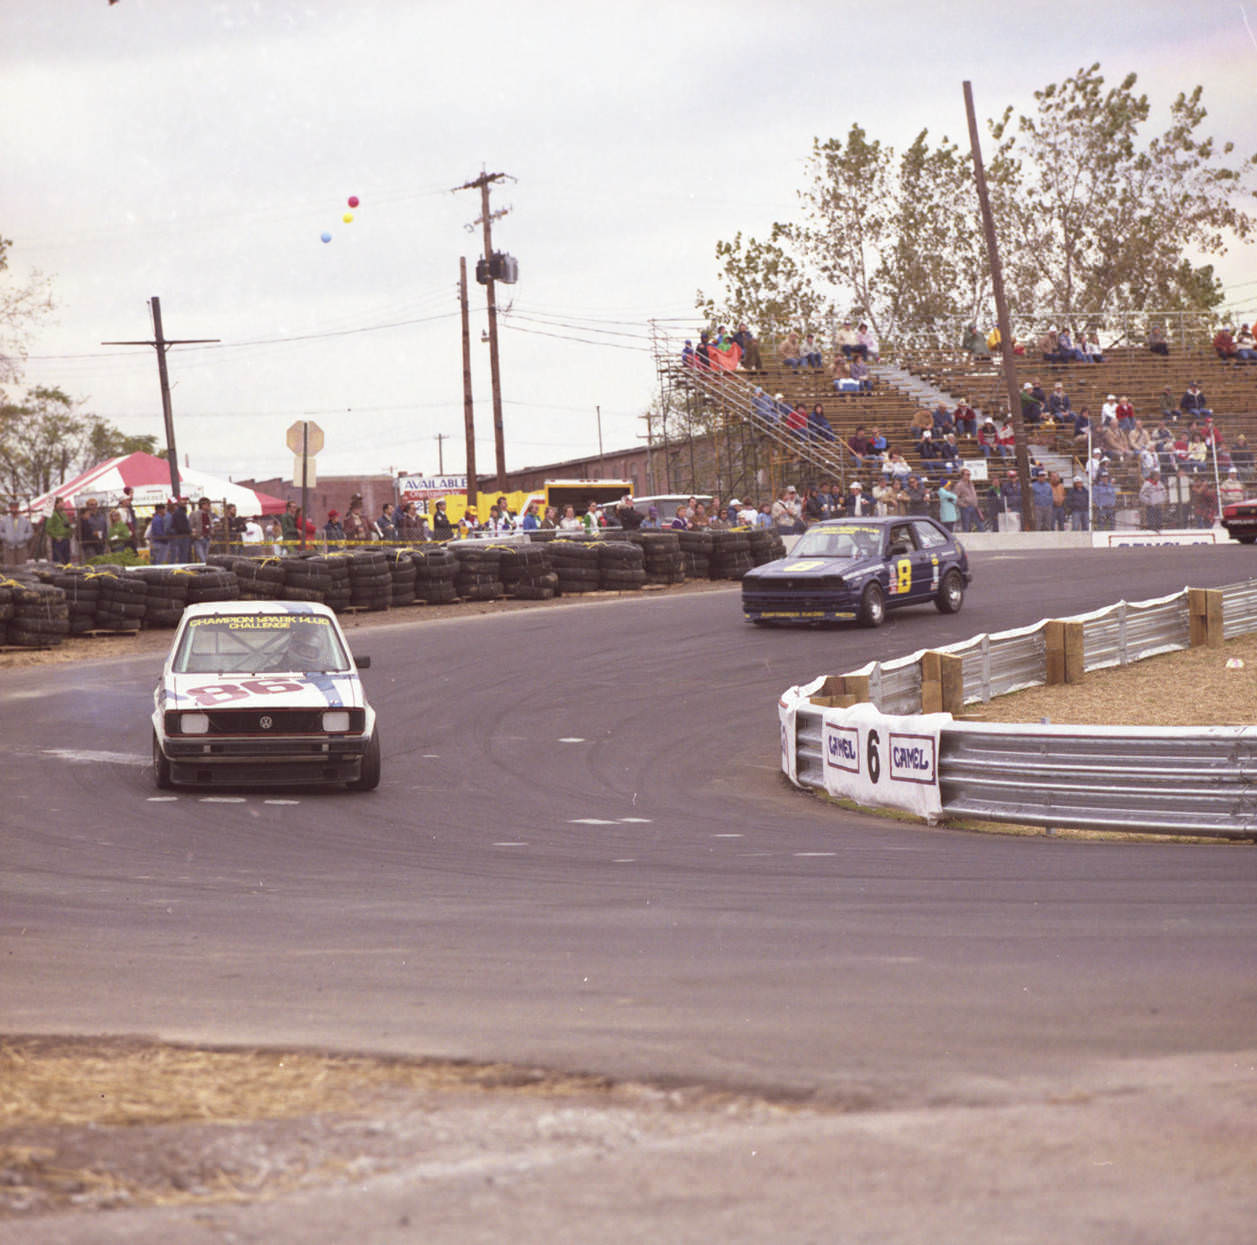 Scenes from the 1985 Columbus Ford Dealers 500 automobile races, October 4-6, 1985.